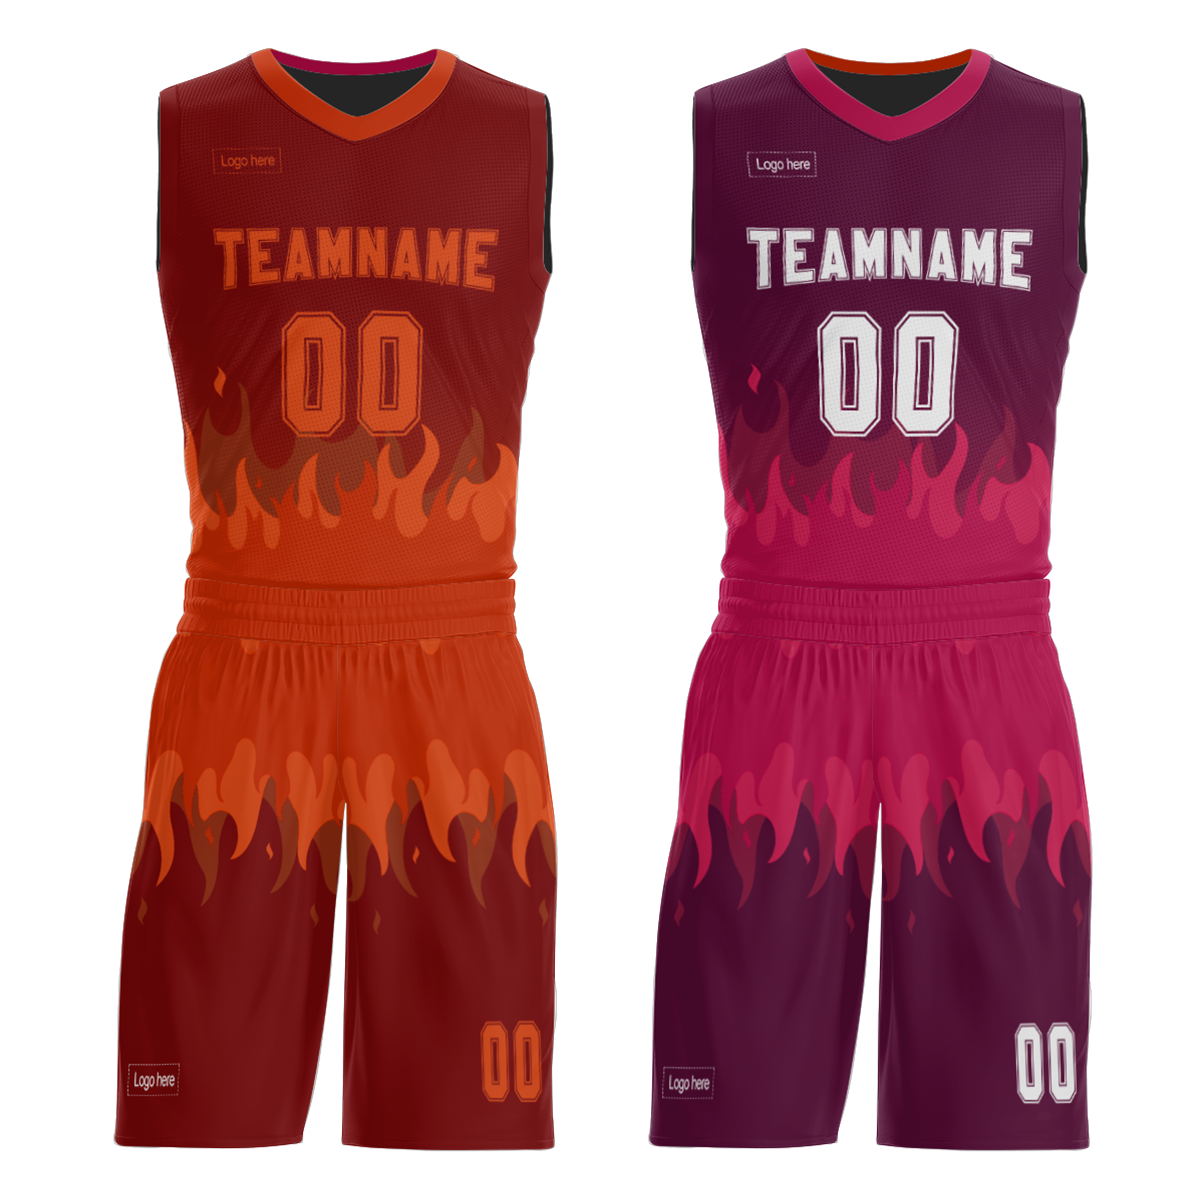 Wholesale New Blank Team Basketball Jerseys Printing Design Your Own Reversible Basketball Uniforms for Men and Women